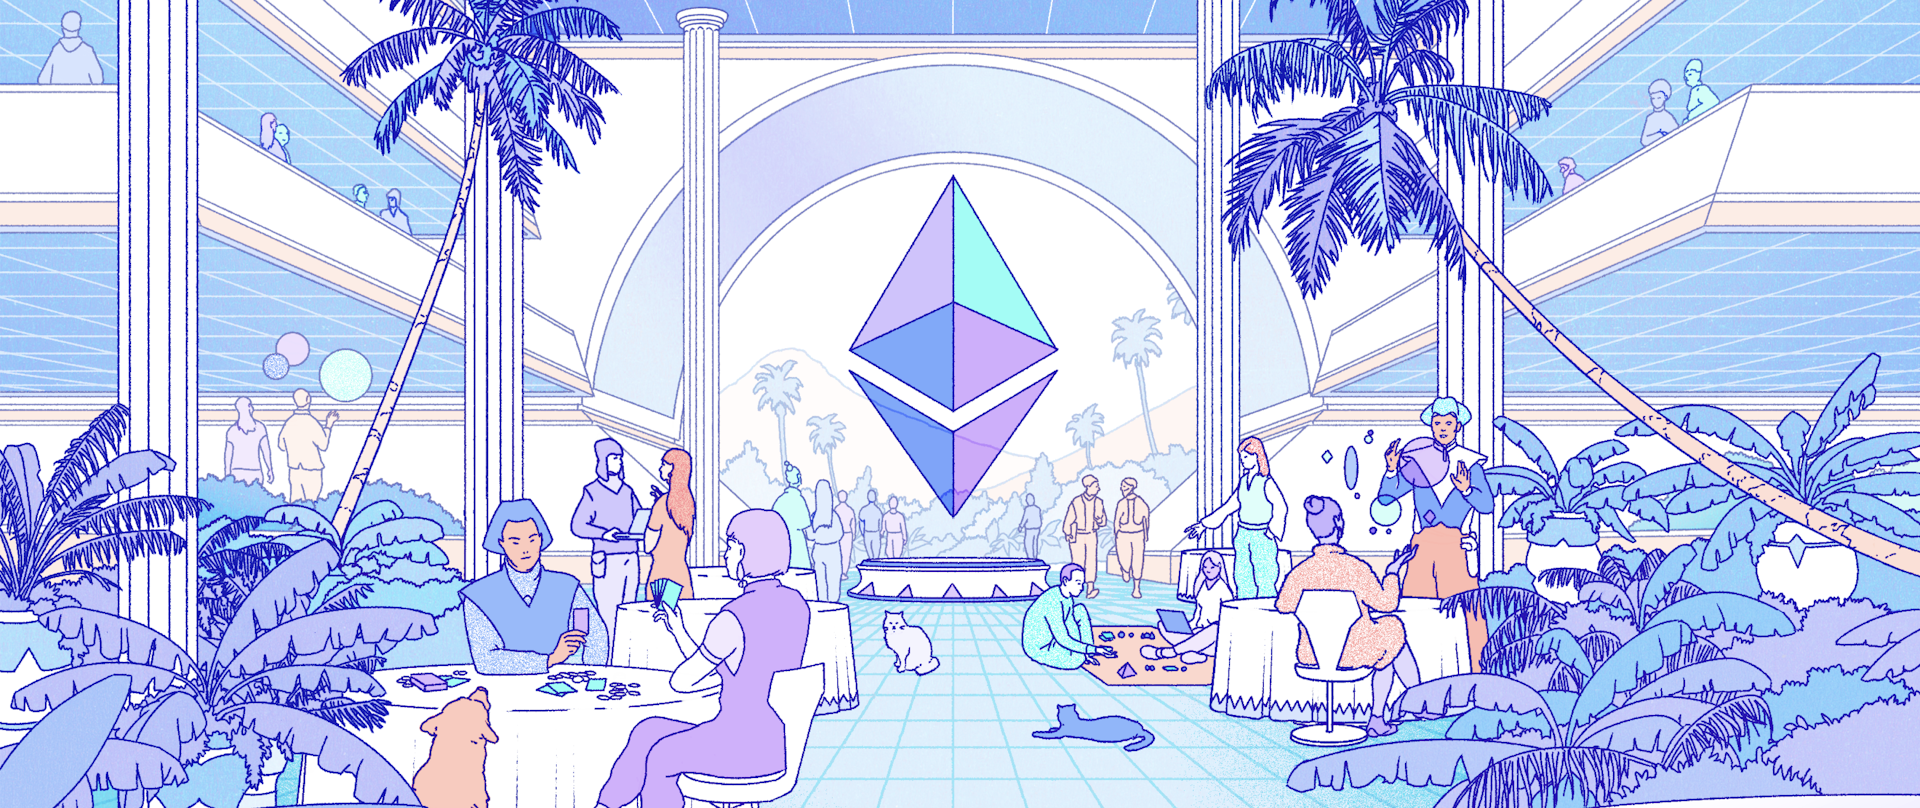 An illustration of a futuristic city, representing the Ethereum ecosystem.